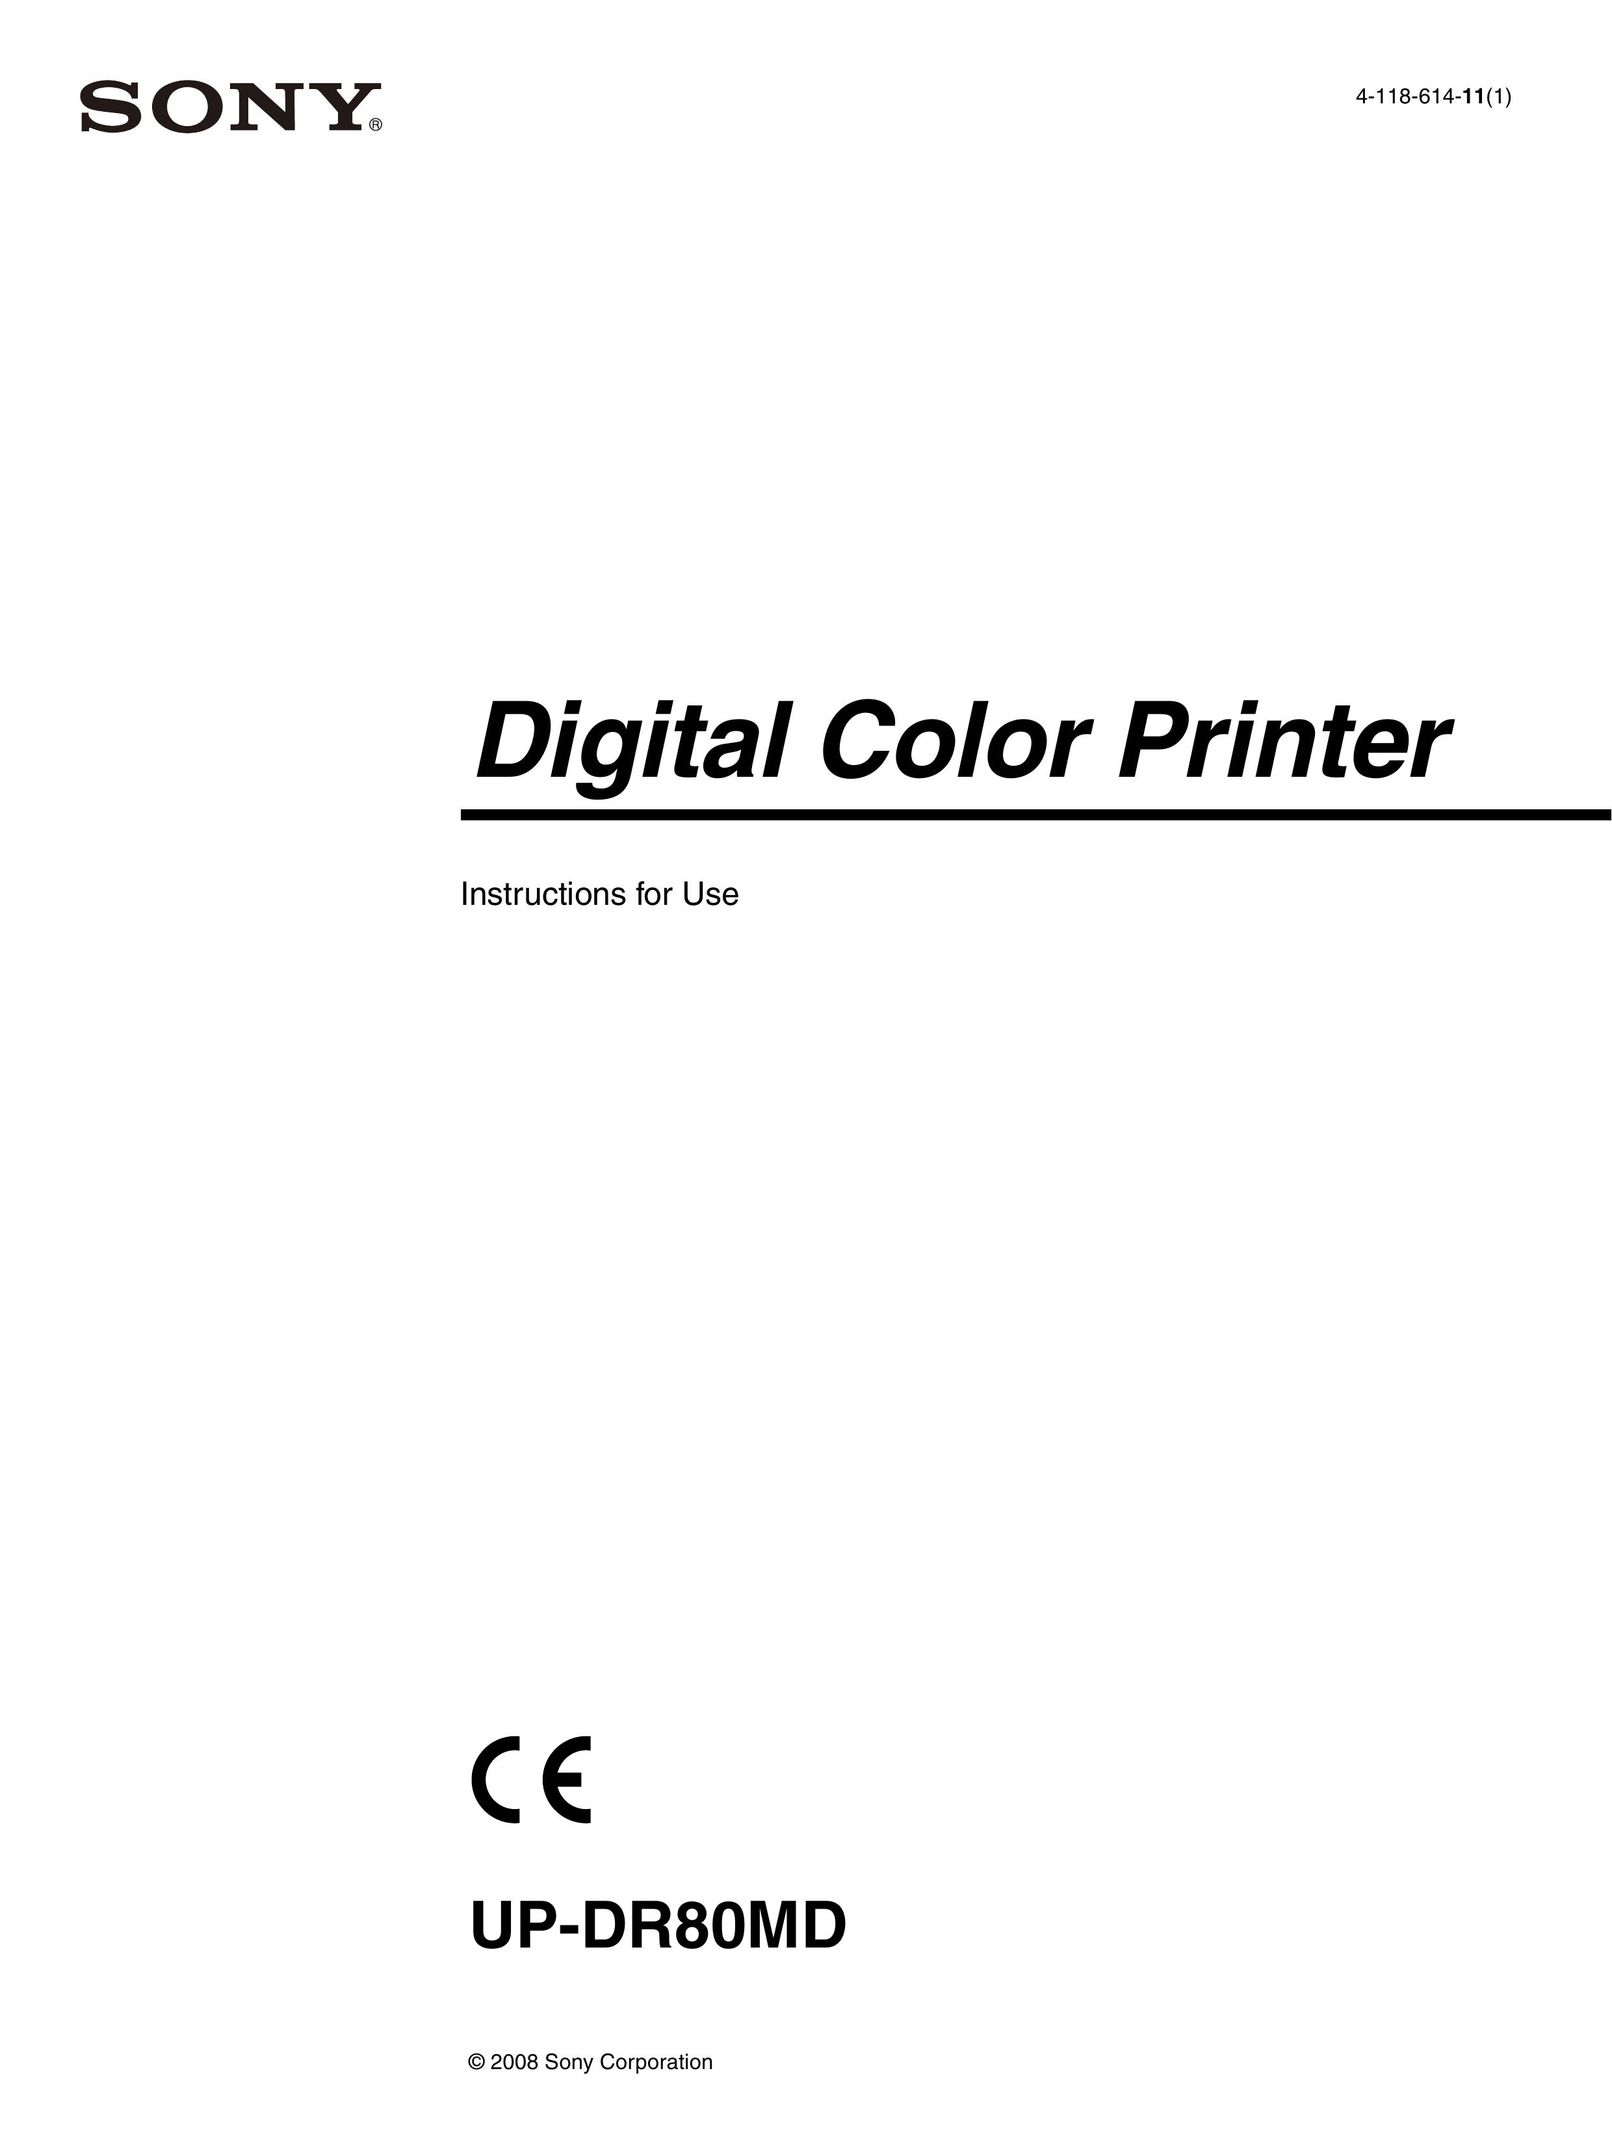 Sony UP-DR80MD All in One Printer User Manual